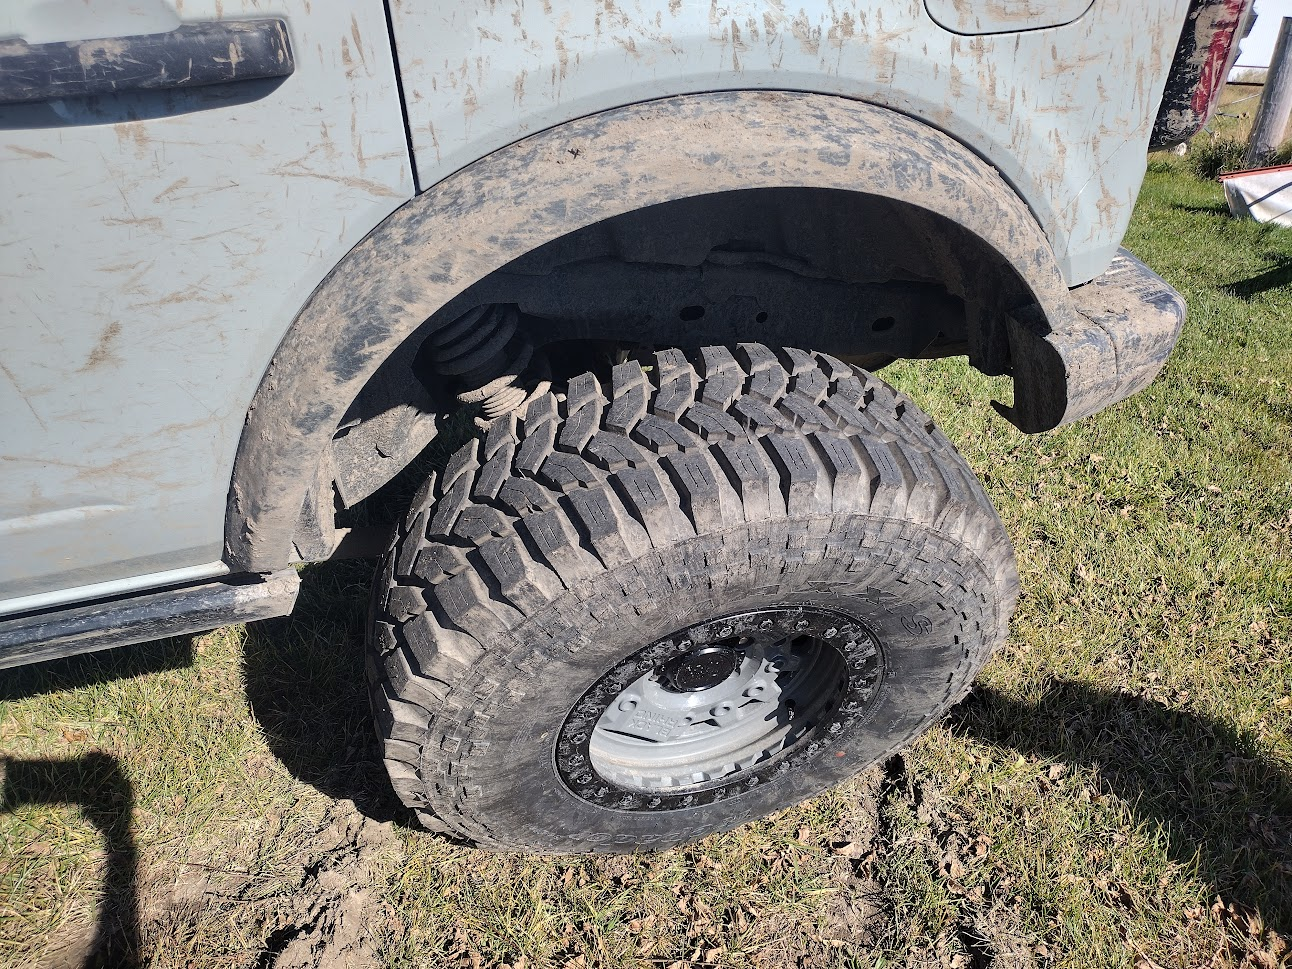 Ford Bronco 37" Tires on a Non-Sasquatch Badlands - My Experience, Results, Pics 20221024_170210